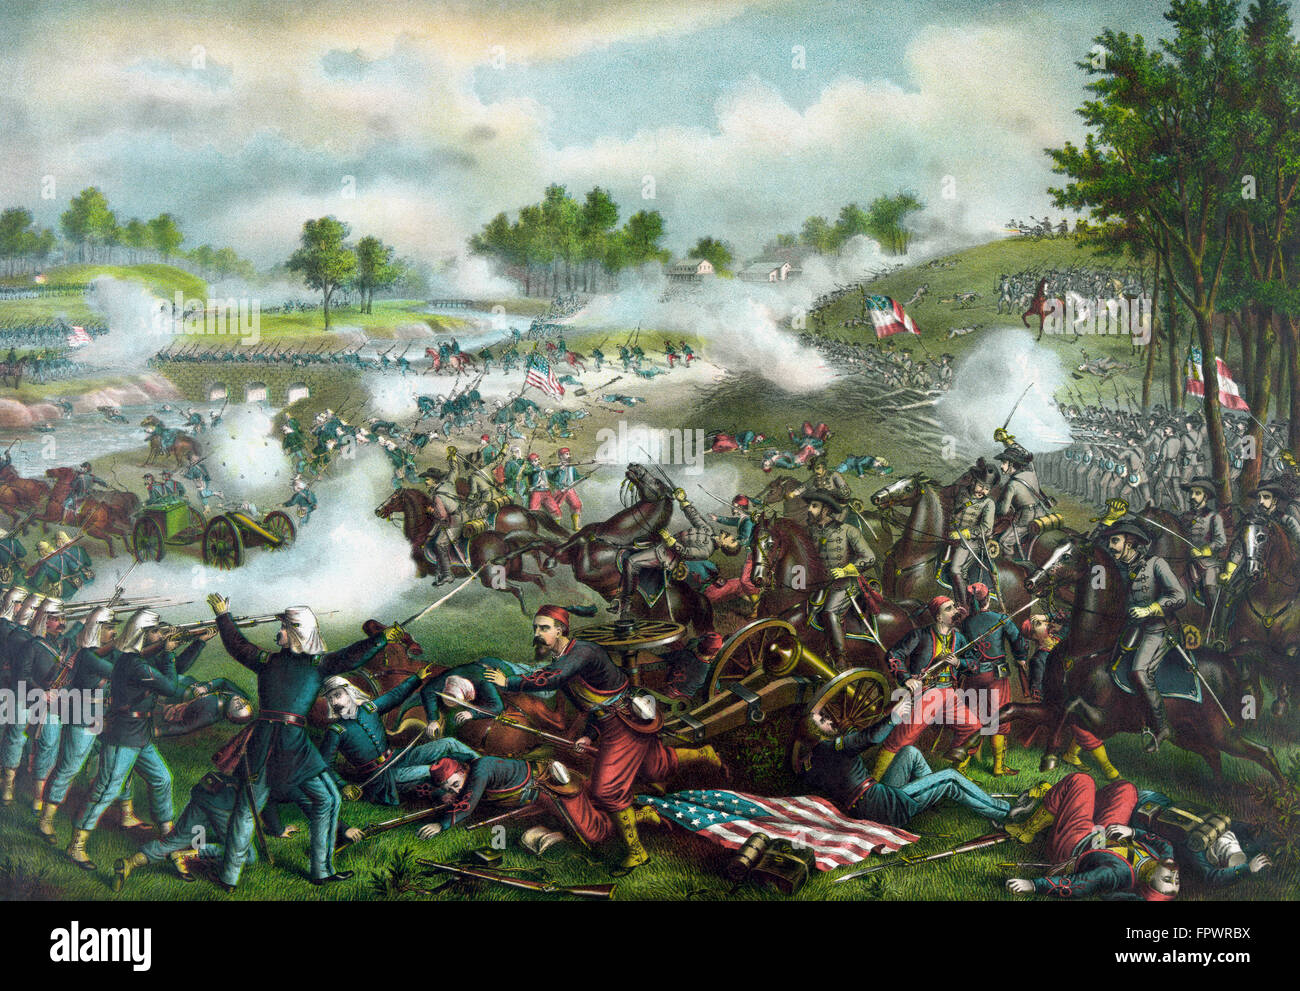 Vintage Civil War painting of Union and Confederate troops fighting at The Battle of Bull Run, also known as The Battle of Manas Stock Photo